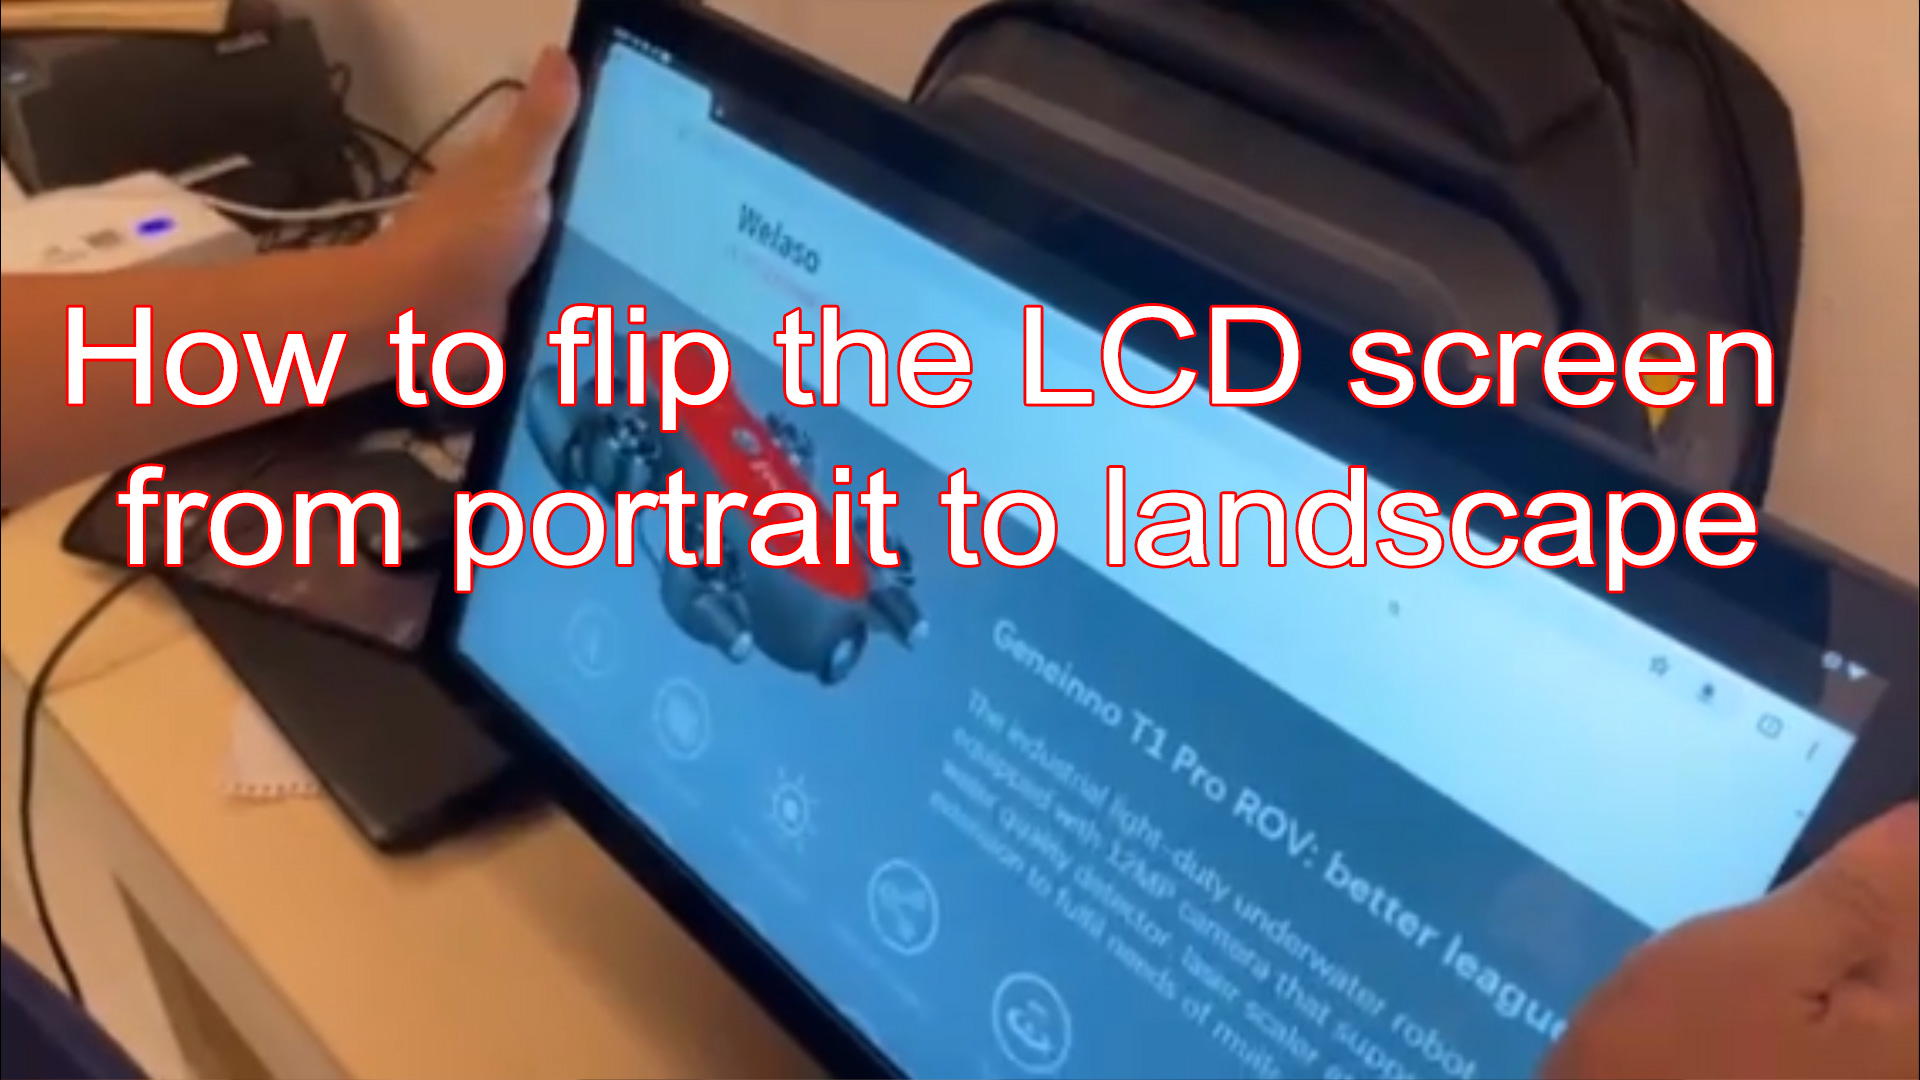 How to flip the LCD screen from portrait to landscape